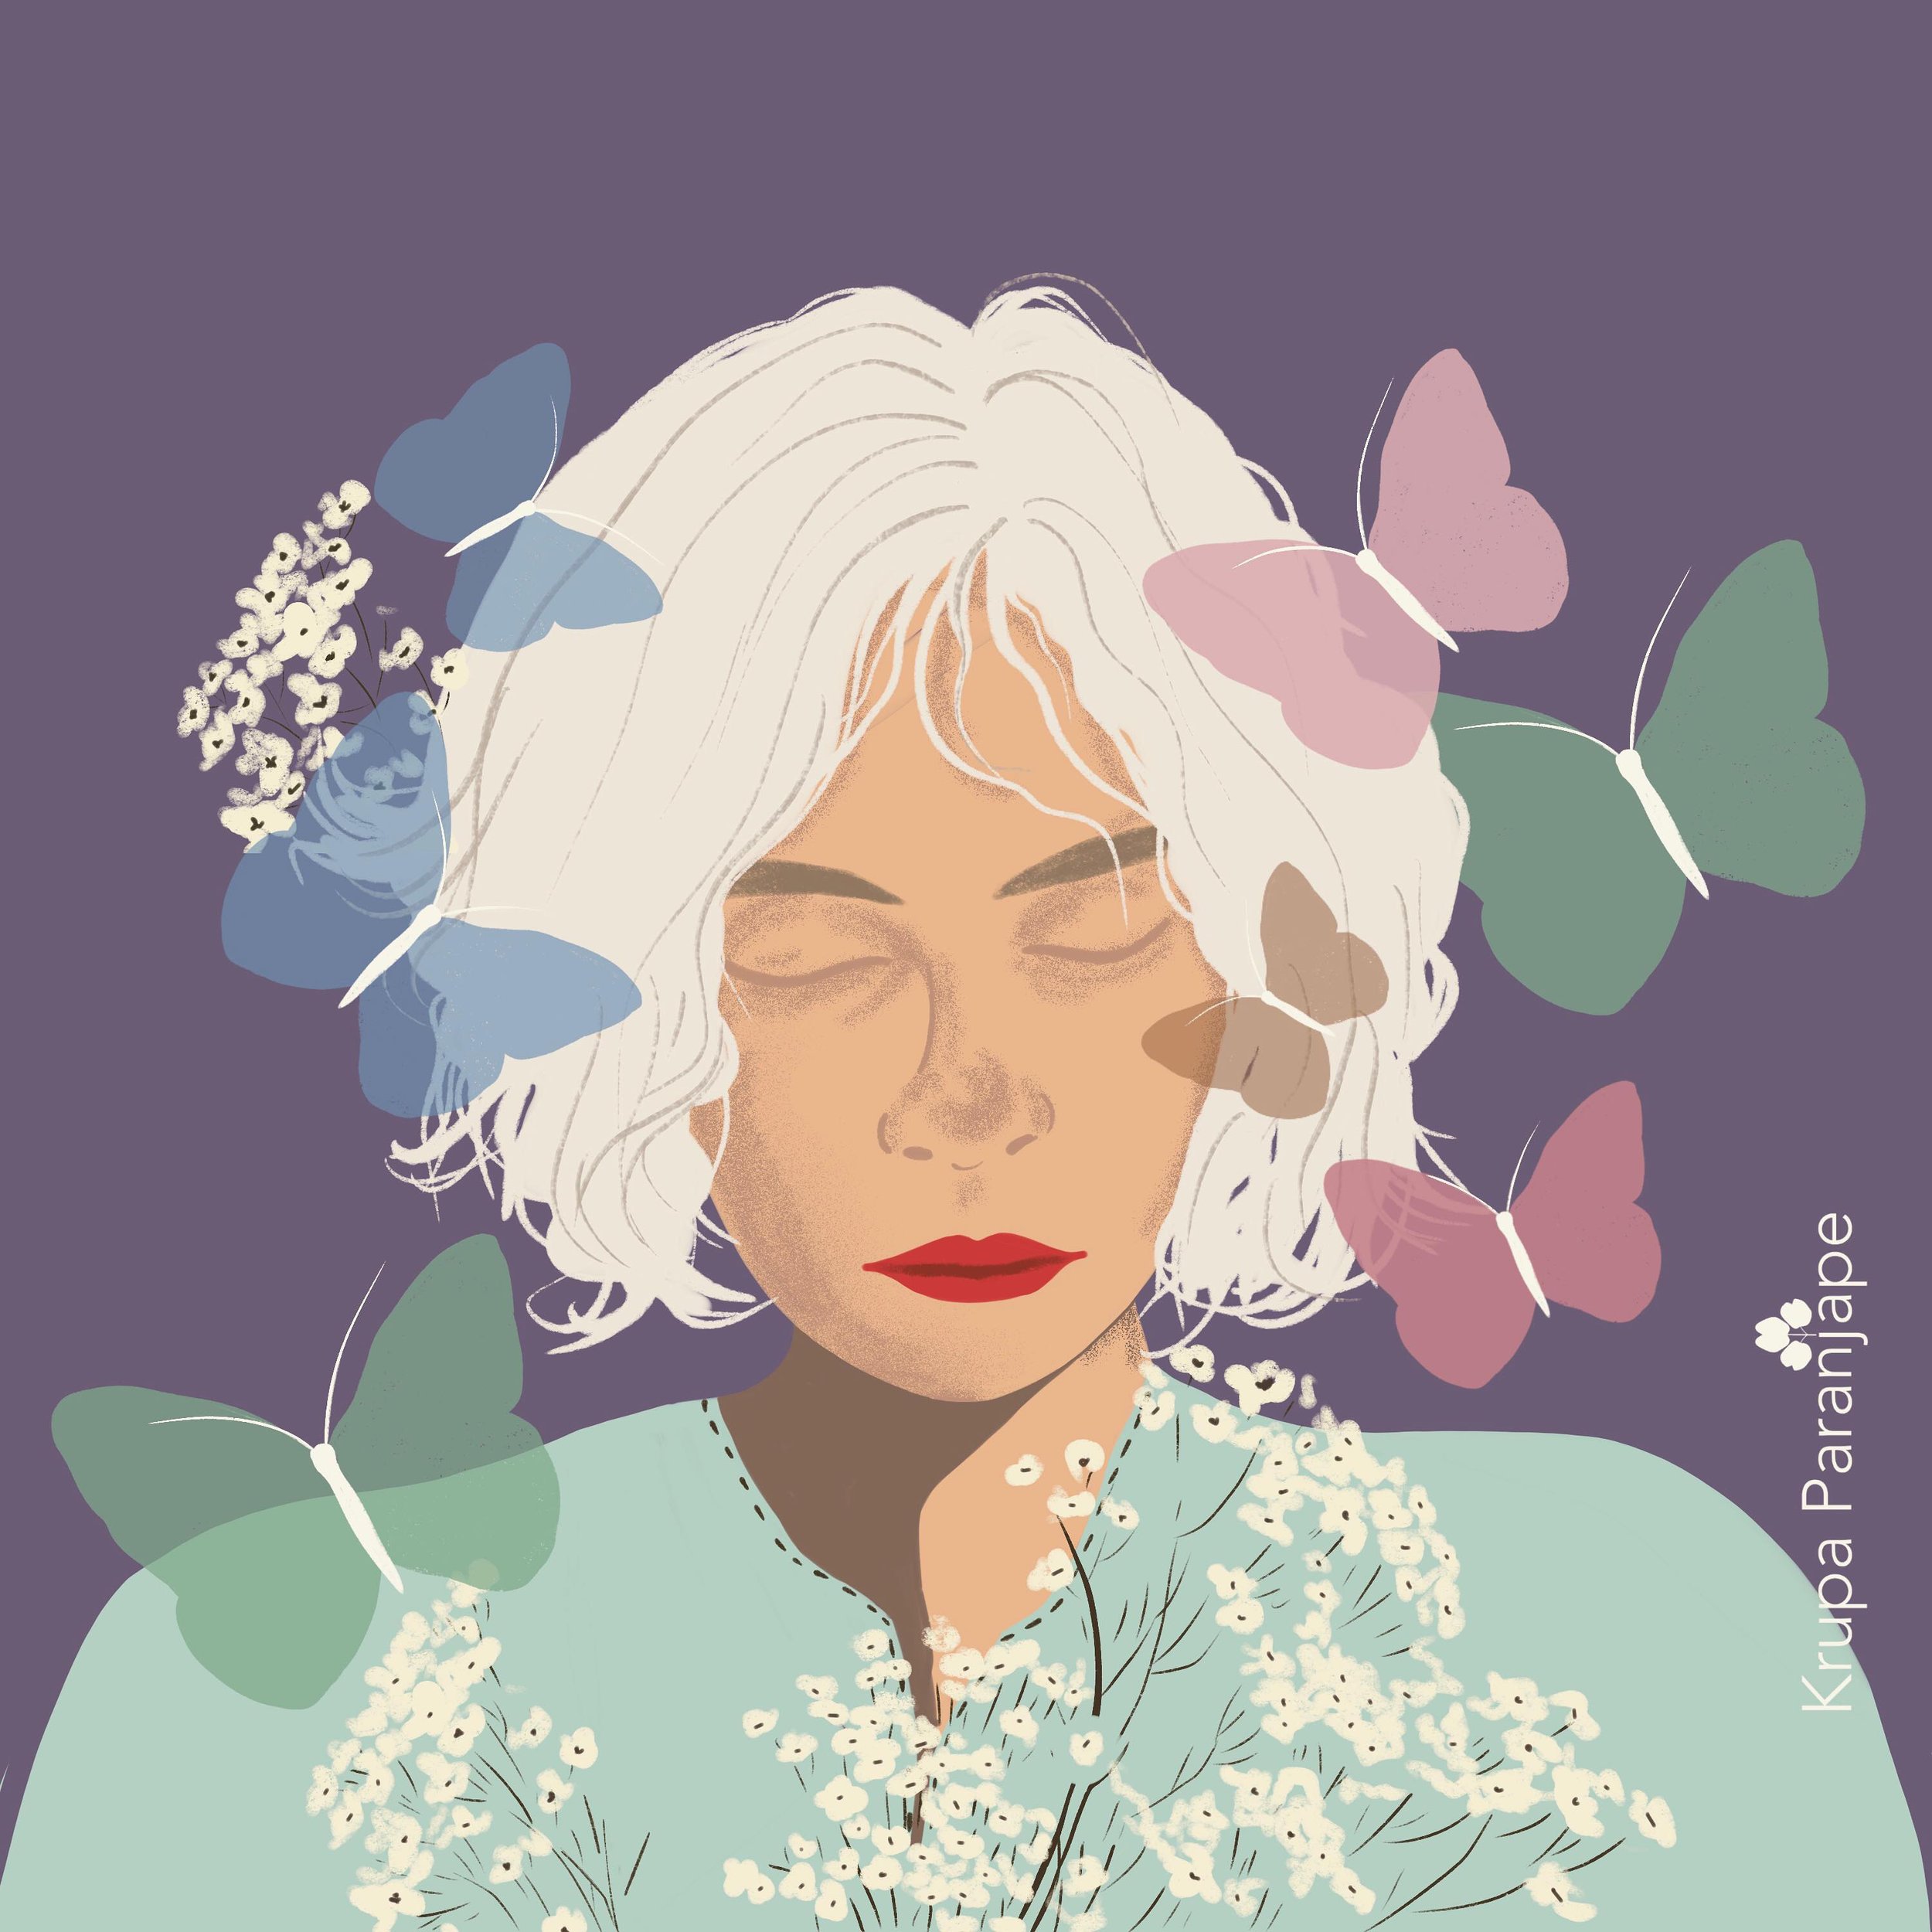 Day 3 #portraitparty portrait drawing challenge by @charlyclements 
Prompt: Dream, White Hair and Red lipstick 

#drawinyourstyle #portraits #dream #butterflies #femaleportrait